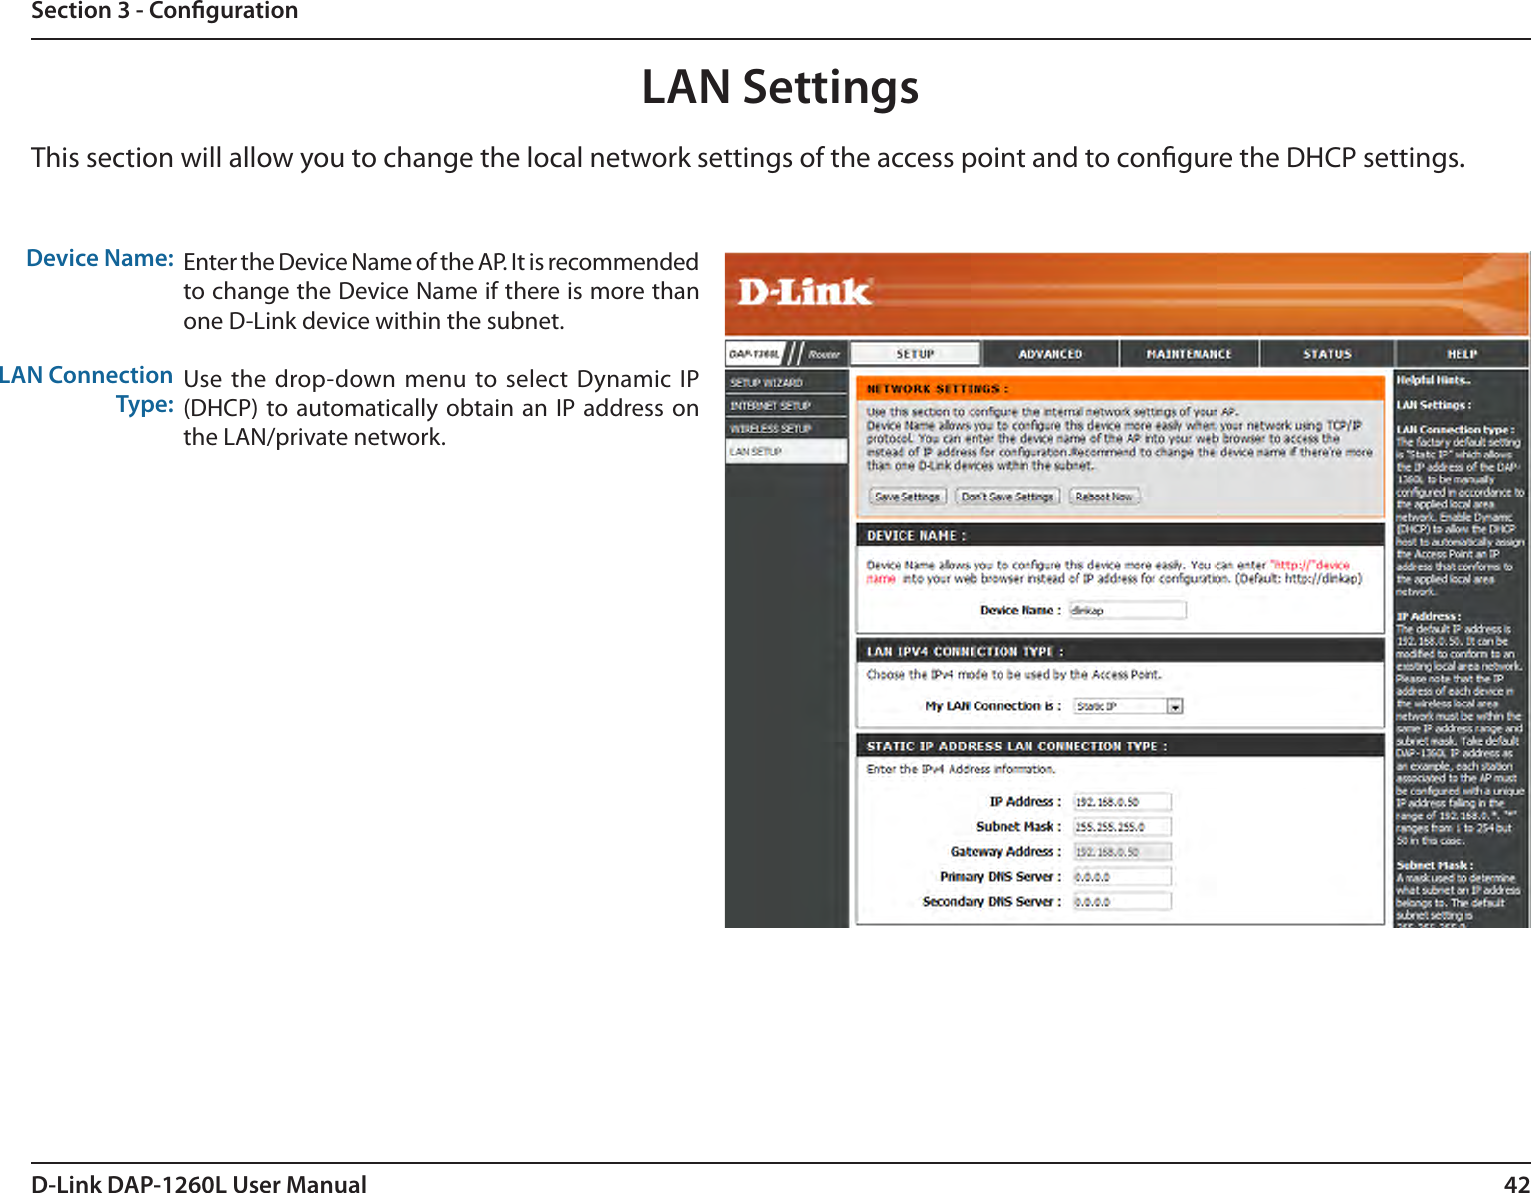 42D-Link DAP-1260L User ManualSection 3 - CongurationLAN SettingsThis section will allow you to change the local network settings of the access point and to congure the DHCP settings.Device Name:LAN Connection Type:Enter the Device Name of the AP. It is recommended to change the Device Name if there is more than one D-Link device within the subnet.Use the drop-down menu  to select Dynamic  IP (DHCP) to automatically obtain an  IP address on the LAN/private network.